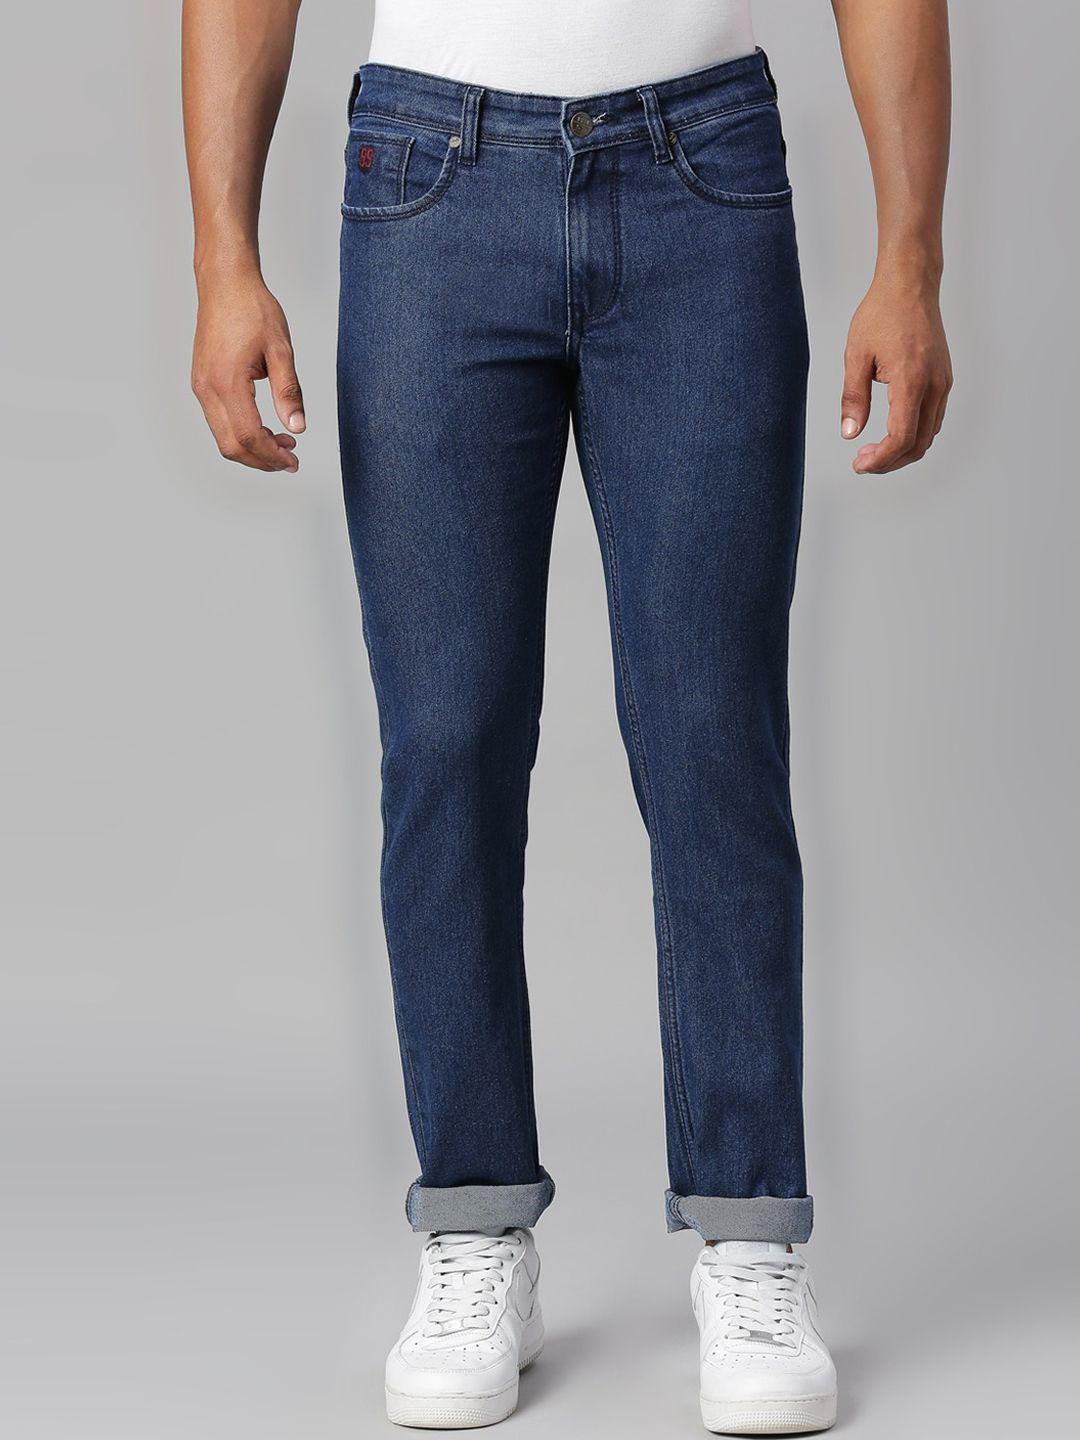 hj-hasasi-men-slim-fit-light-fade-stretchable-cotton-jeans